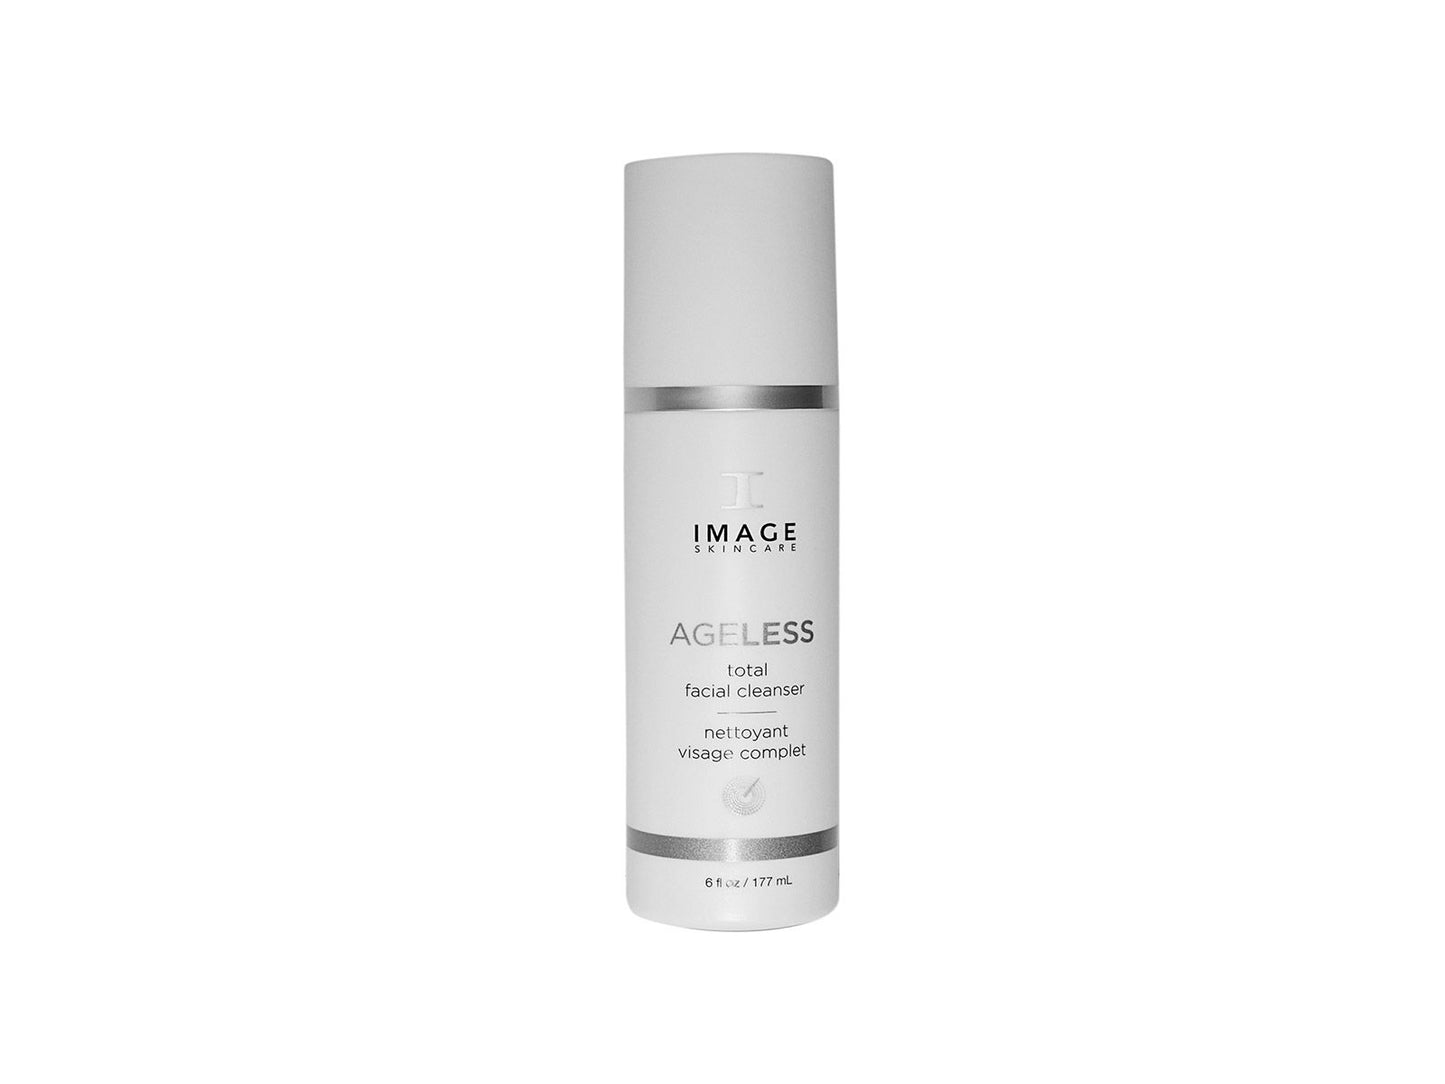 Image skincare AGELESS Total Facial Cleanser 177 ml